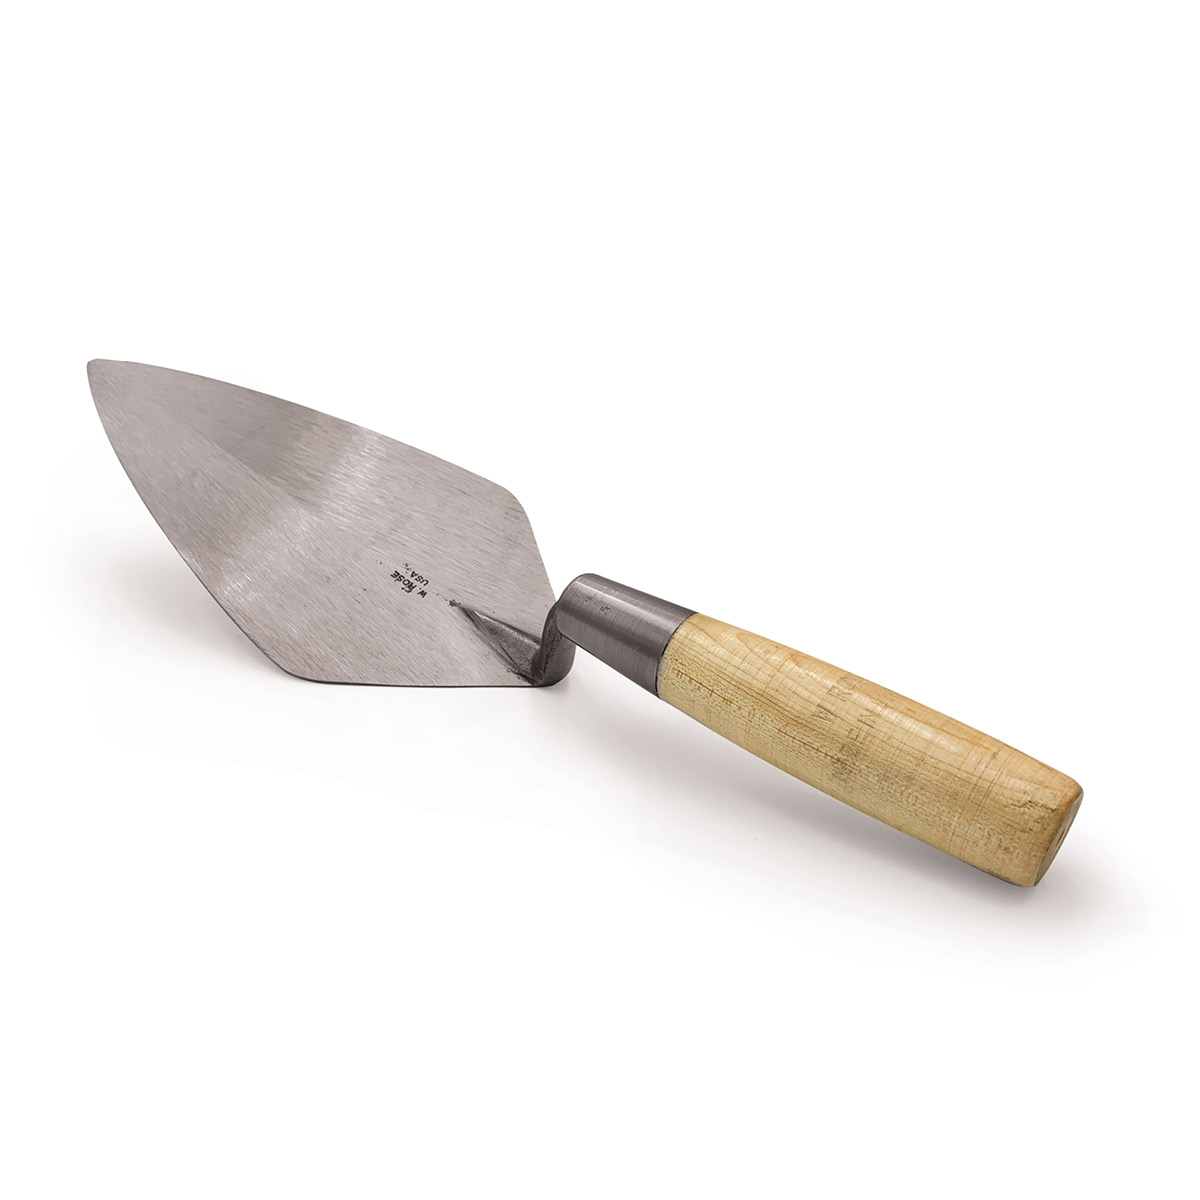 Speedcrete supply w.rose trowels in the United Kingdom. This Narrow London pattern trowel has the traditional wooden handle. Masonry tools for professionals.